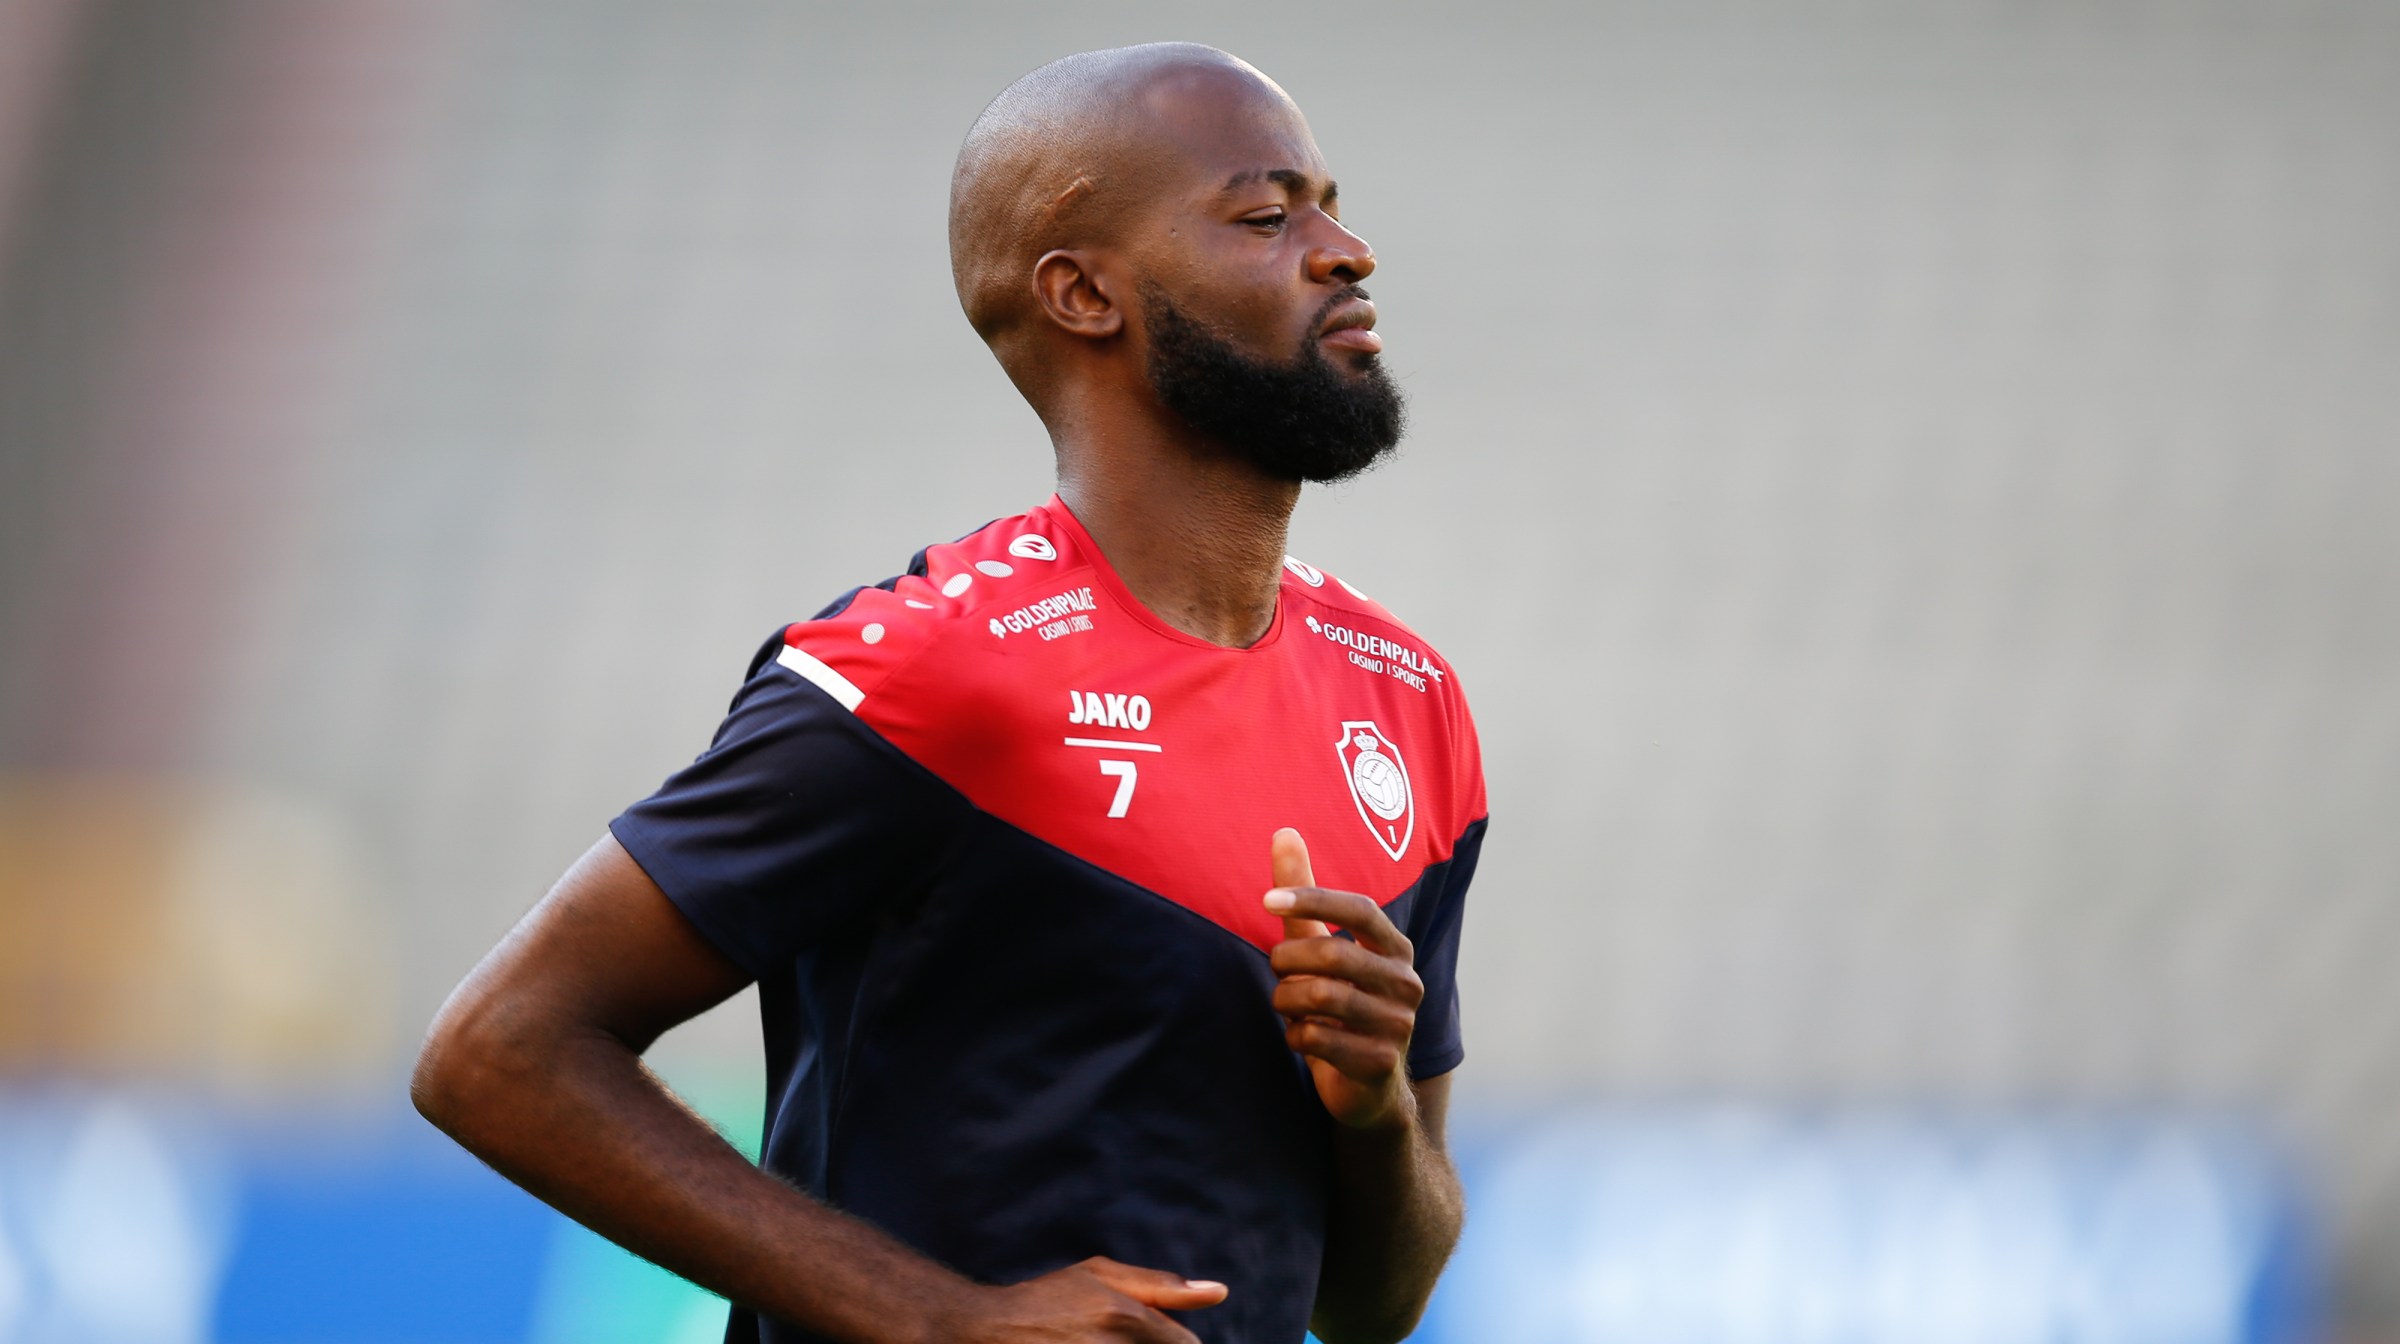 Antwerp's Didier Lamkel Ze pictured during a training session of soccer team Royal Antwerp FC, Friday 31 July 2020 in Brussels, in preparation of tomorrow's final of the 'Croky Cup' Belgian cup against Club Brugge KV.